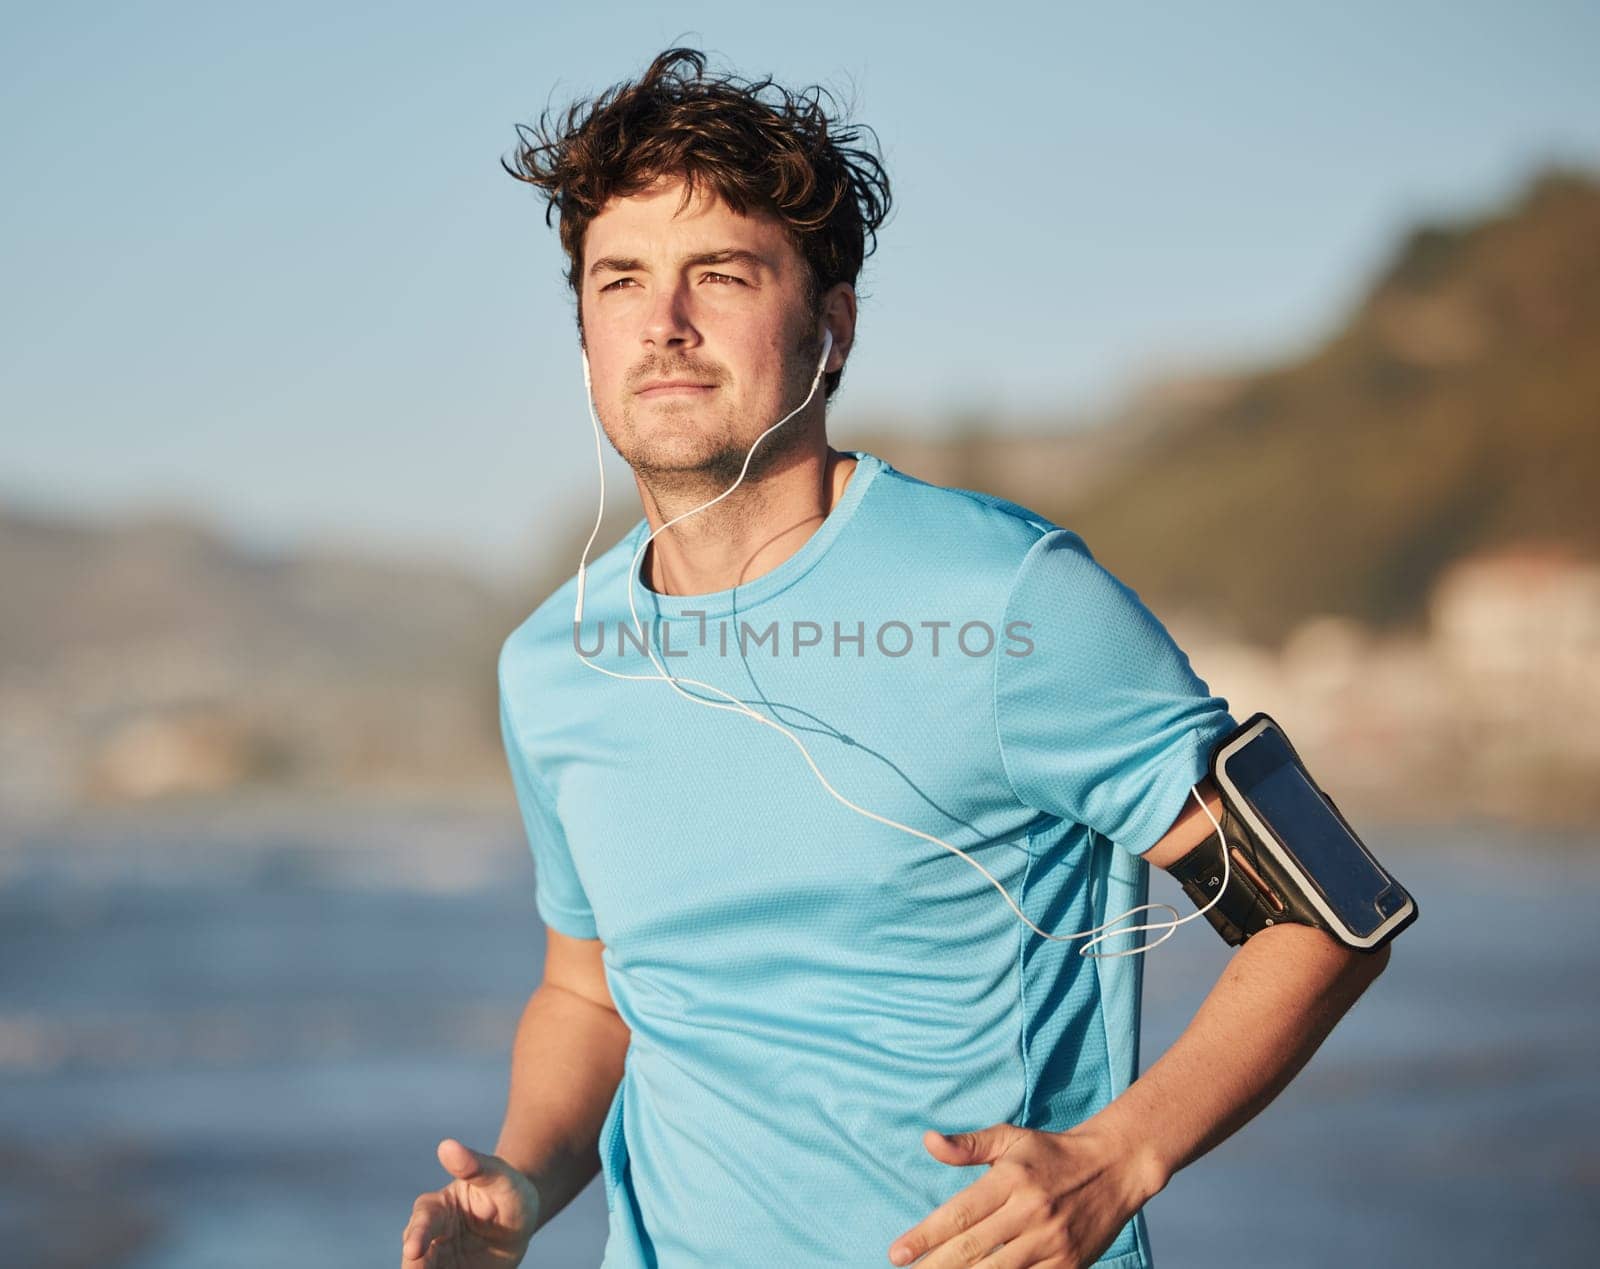 Running, music and man athlete at beach with headphones run by the ocean with audio streaming. Mobile radio, web podcast or training song of a runner athlete listening to a track on an outdoor run.